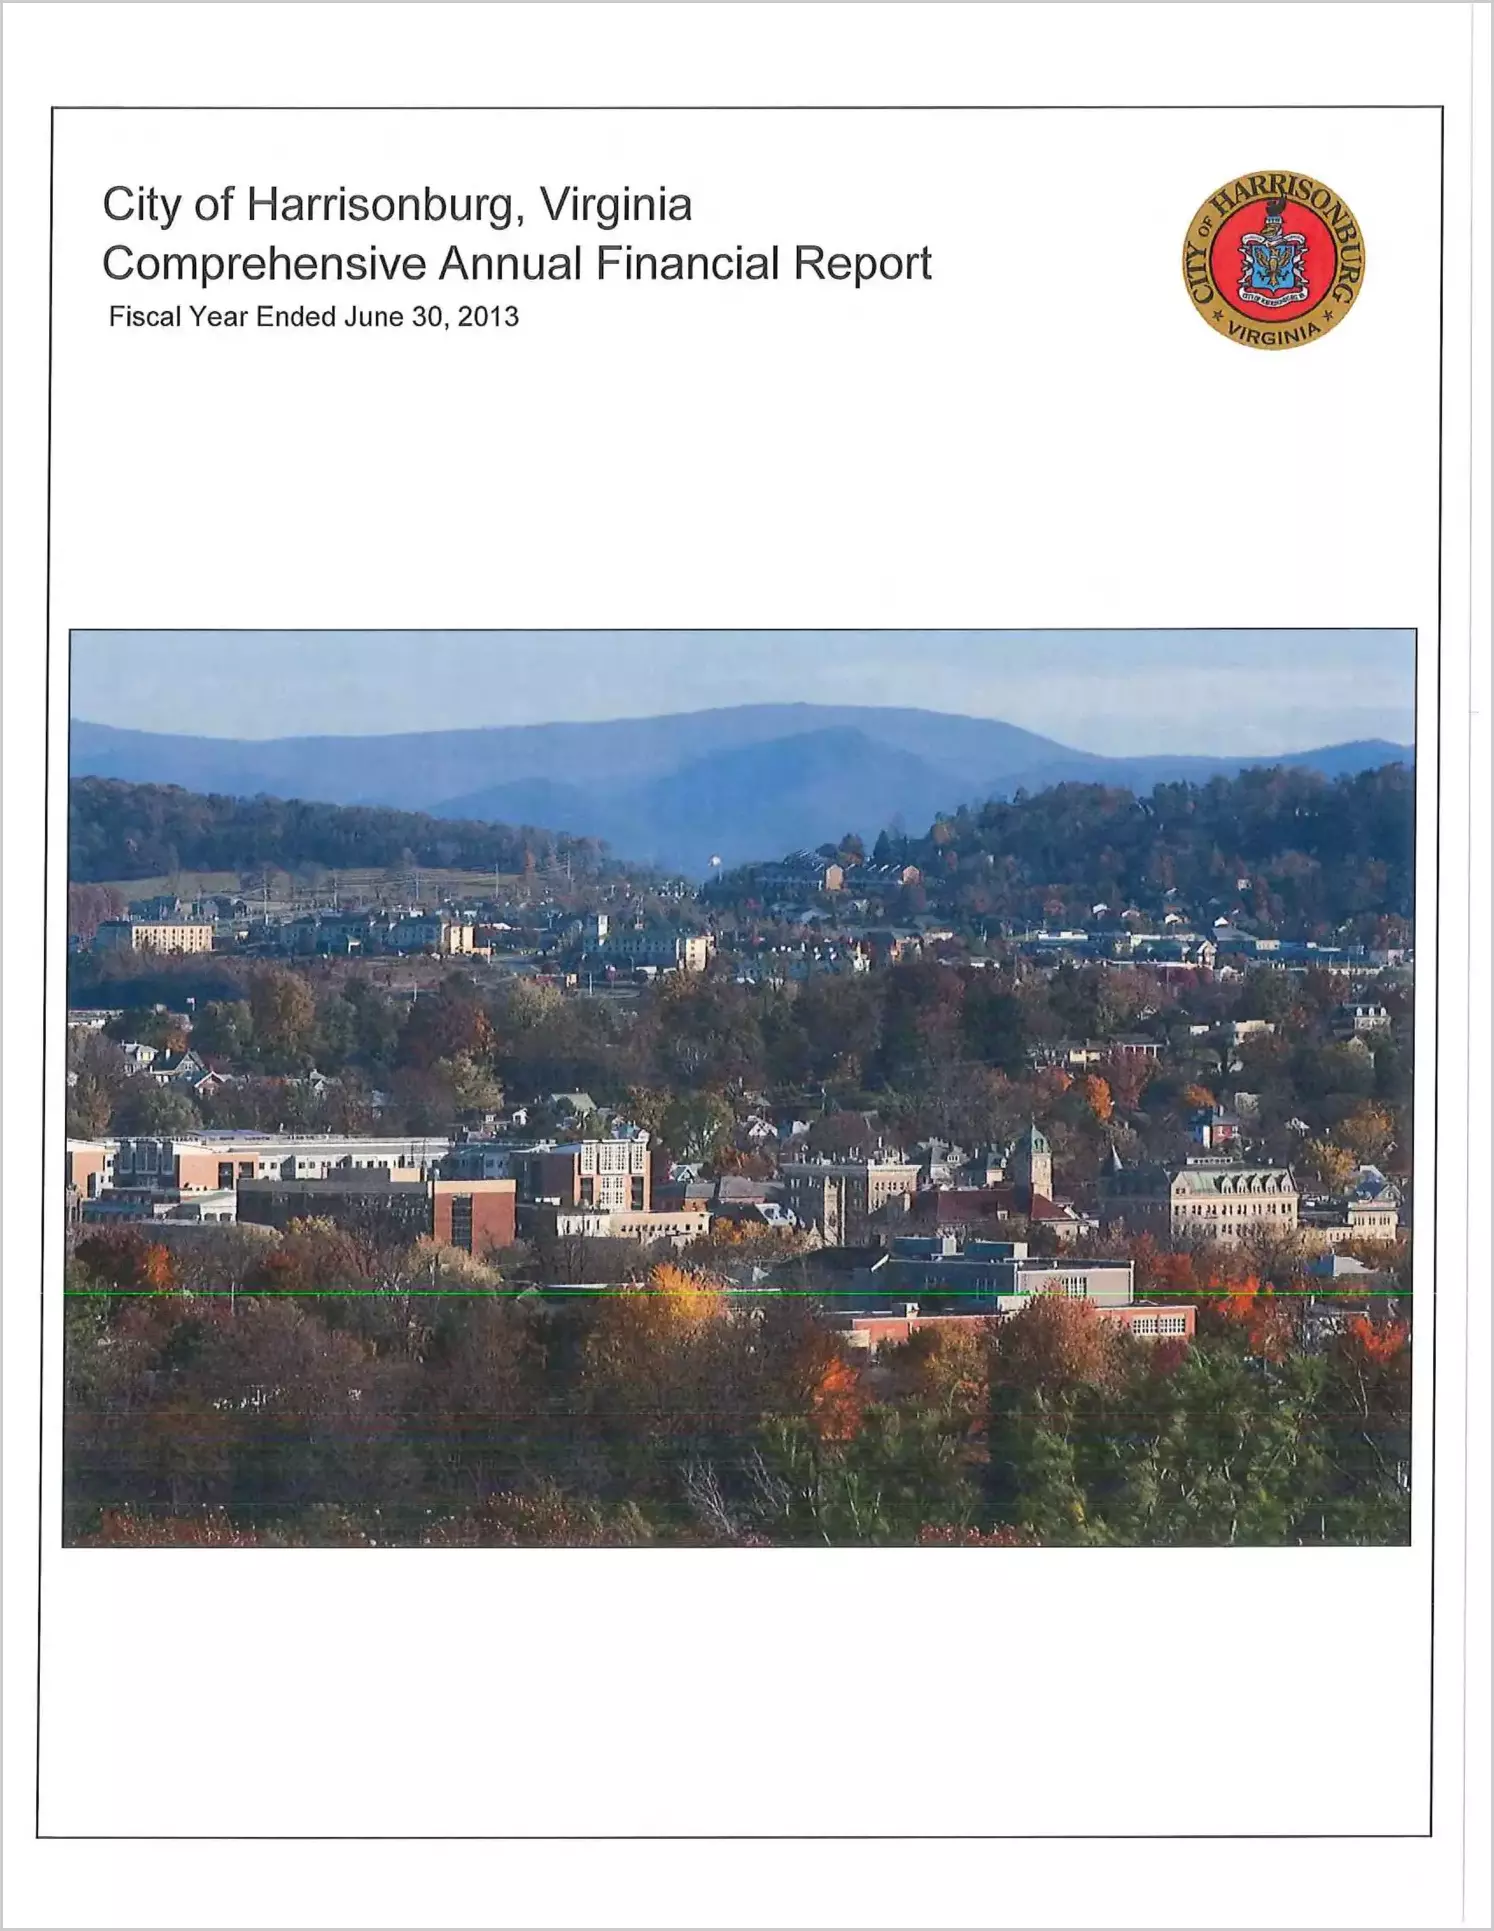 2013 Annual Financial Report for City of Harrisonburg